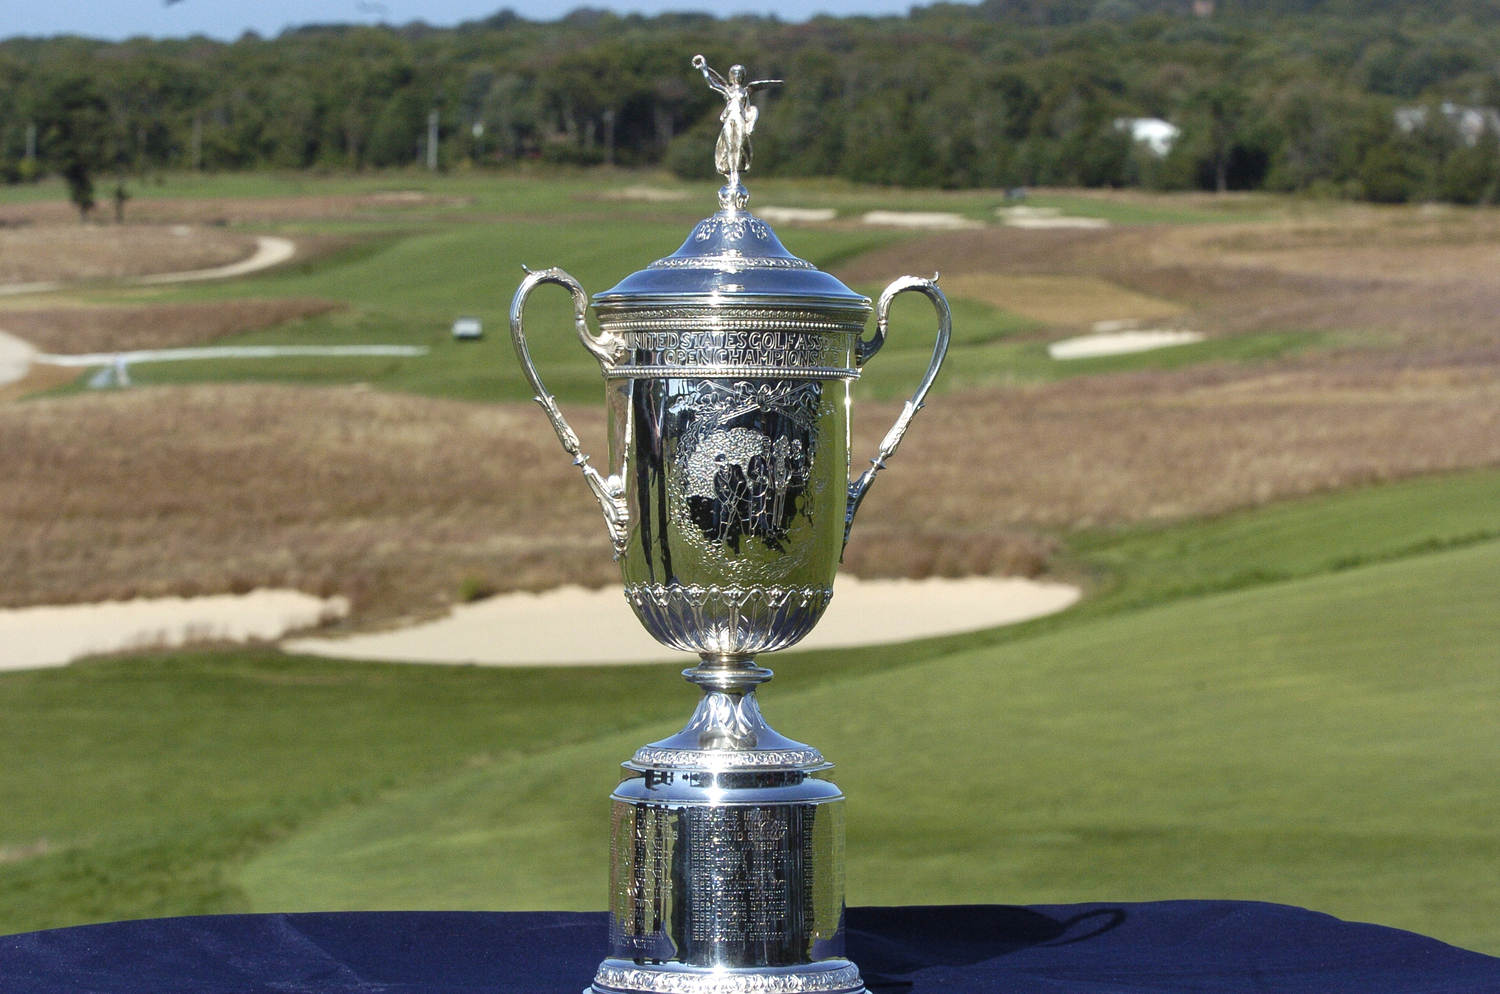 The USGA announced on Saturday that Shinnecock Hills Golf Club will host both the U.S. Open and U.S. Women's Open in 2036.   DANA SHAW